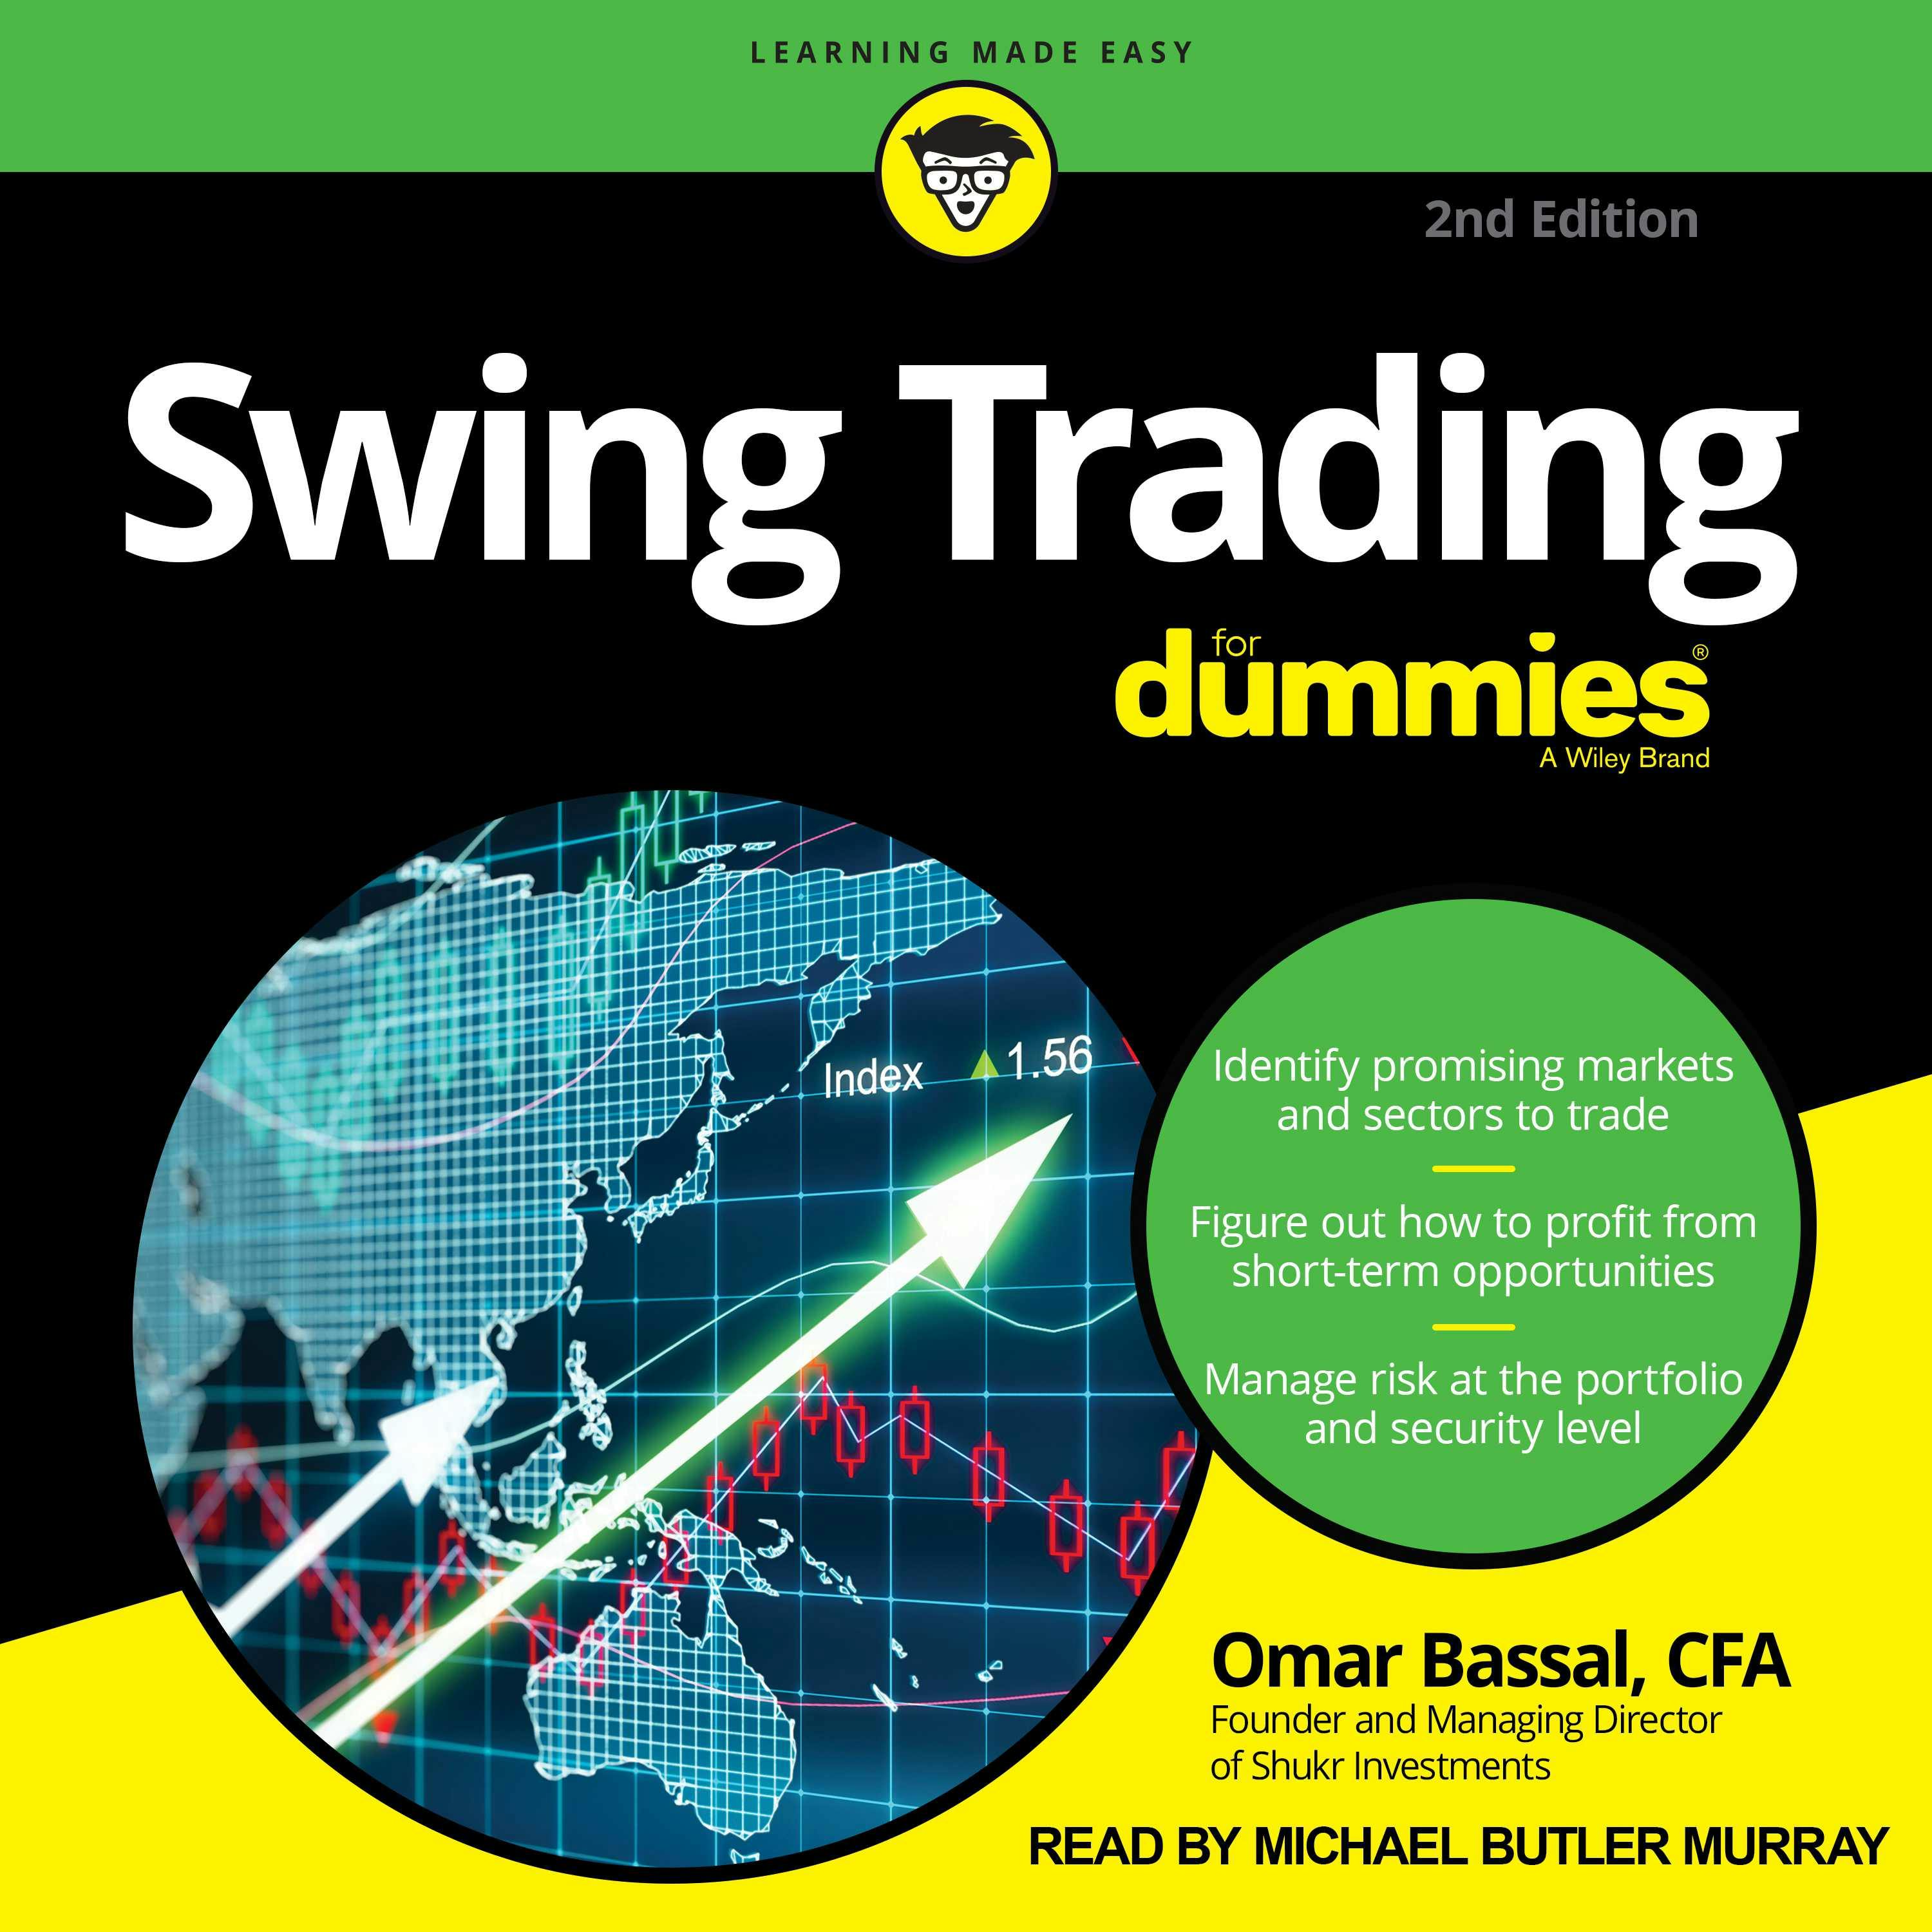 Swing Trading for dummies: 2nd Edition - CFA